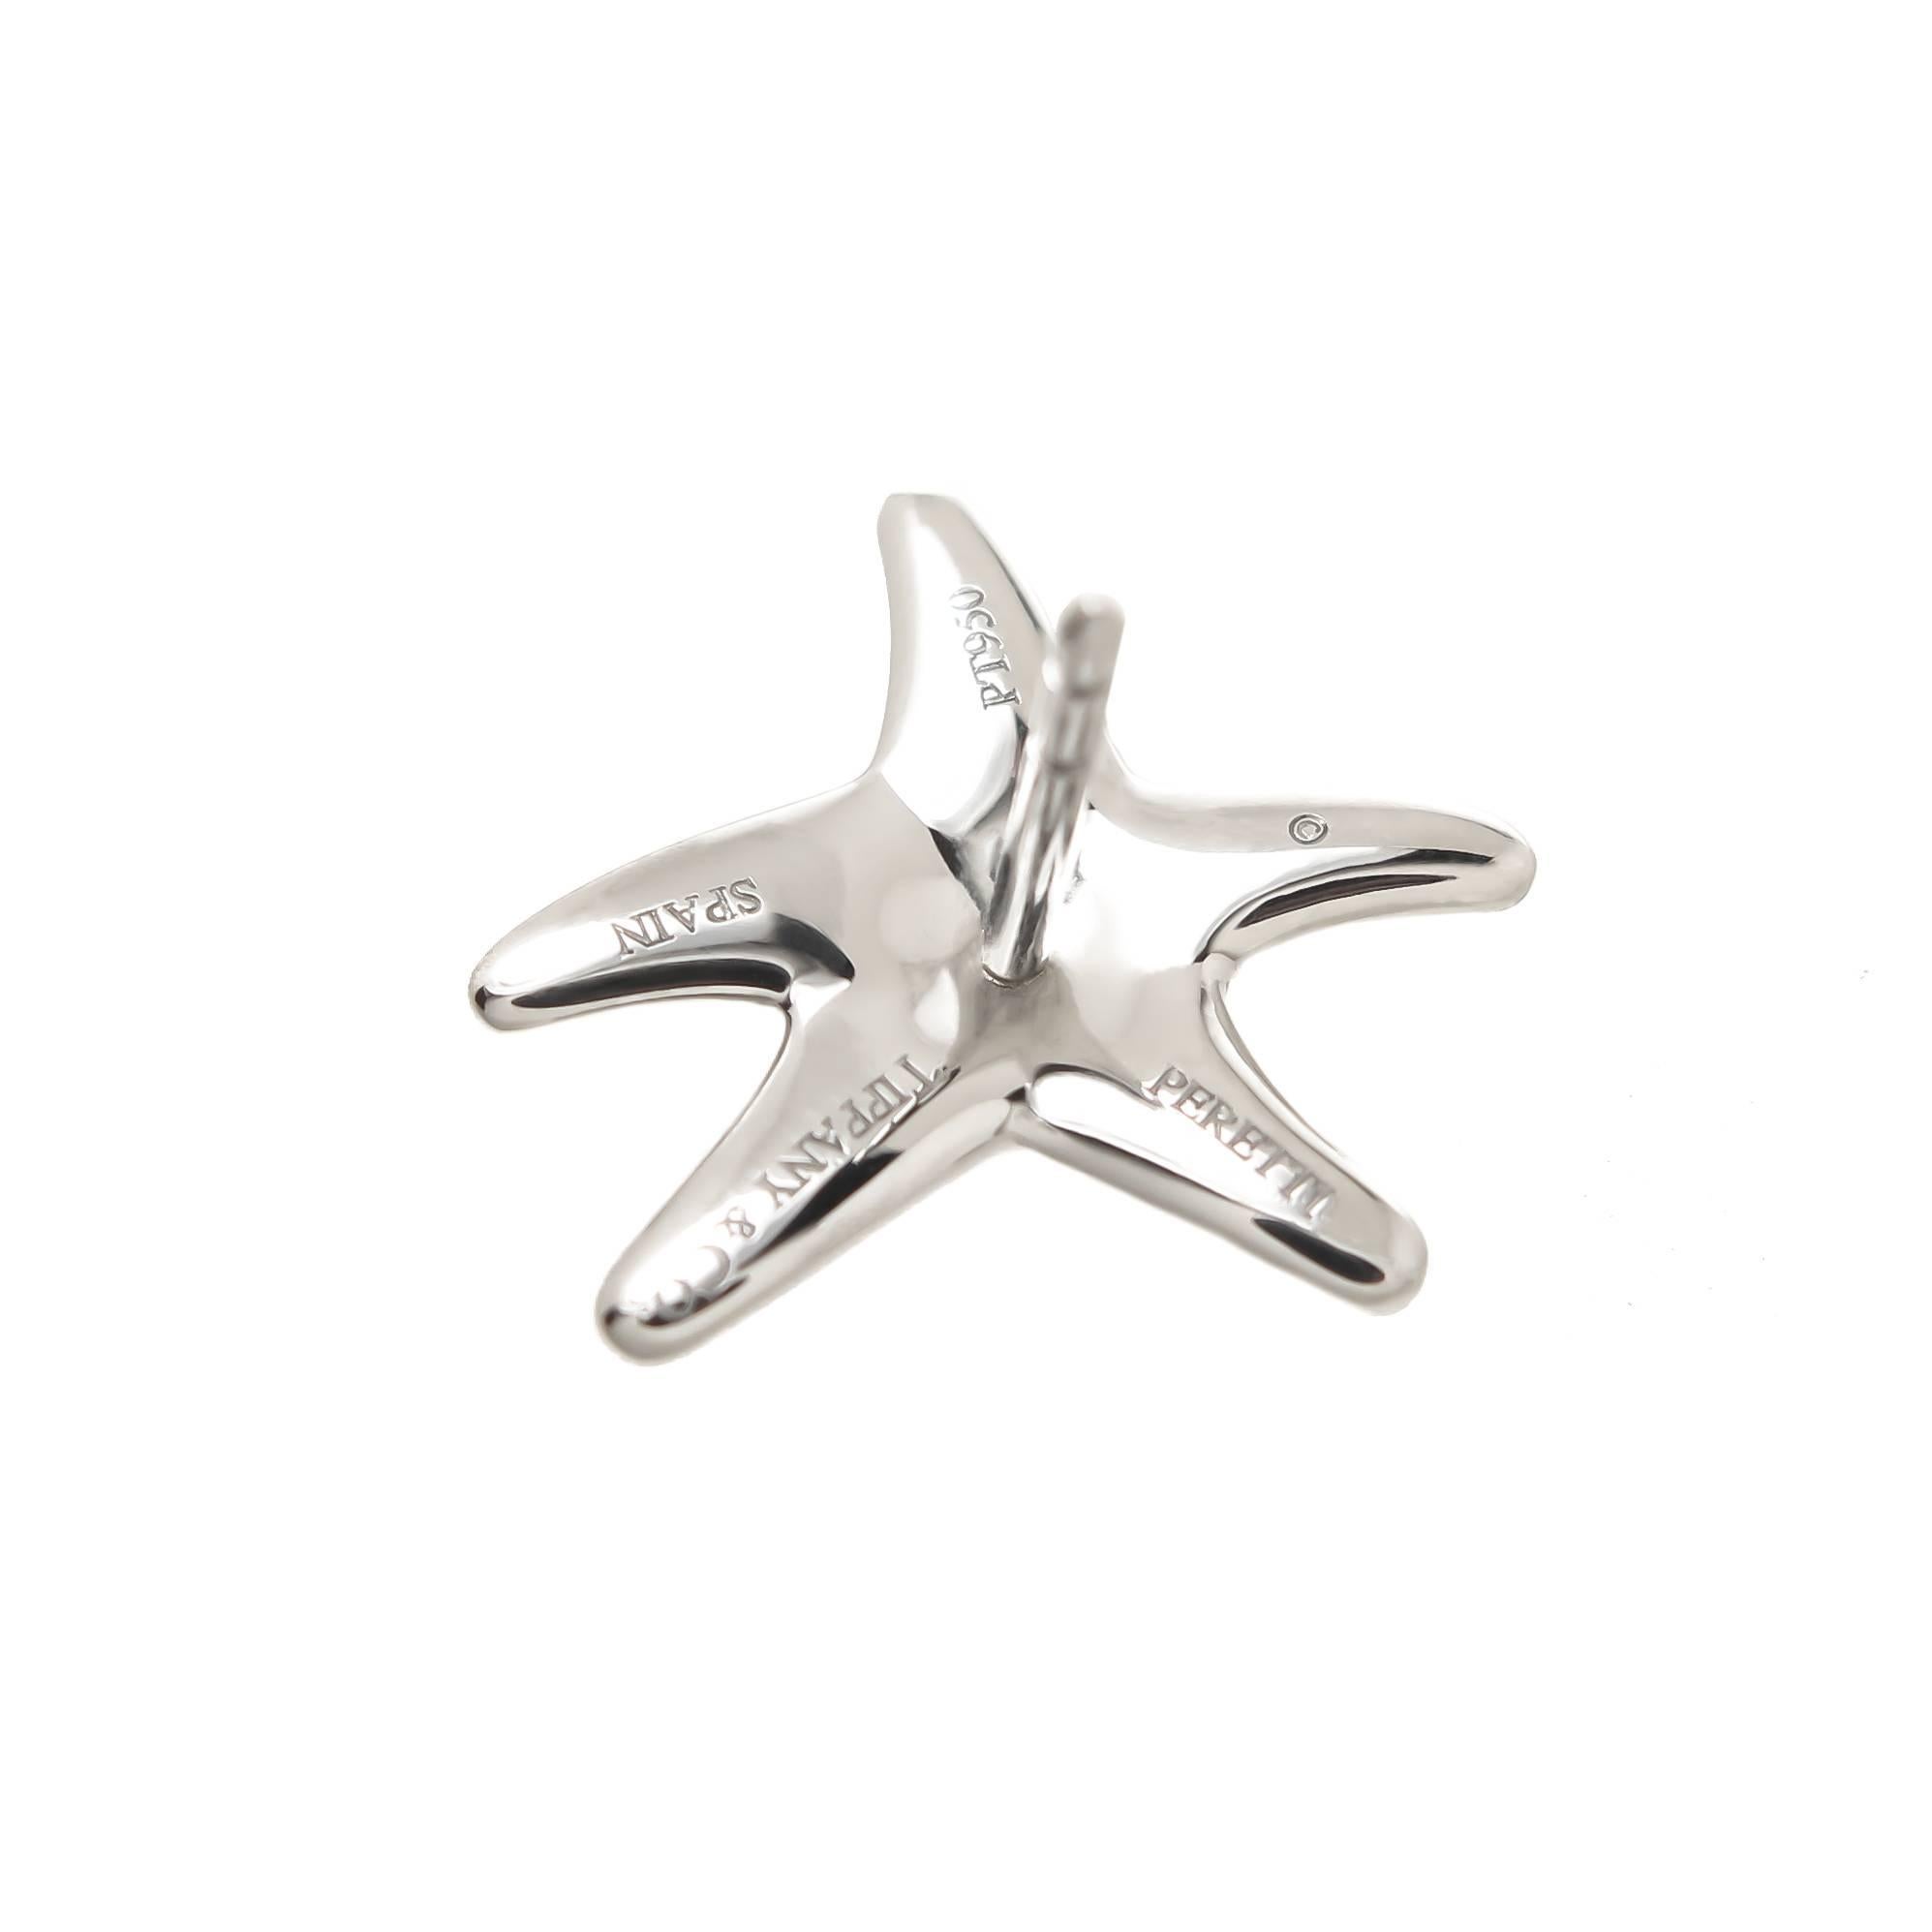 Circa 2005 Elsa Peretti for Tiffany & company Platinum Starfish earrings, measuring 5/8 inch in diameter and set with round Brilliant cut Diamonds totaling .35 carat. Post Backs with pressure fit safety.  Original Tiffany presentation Box. Excellent